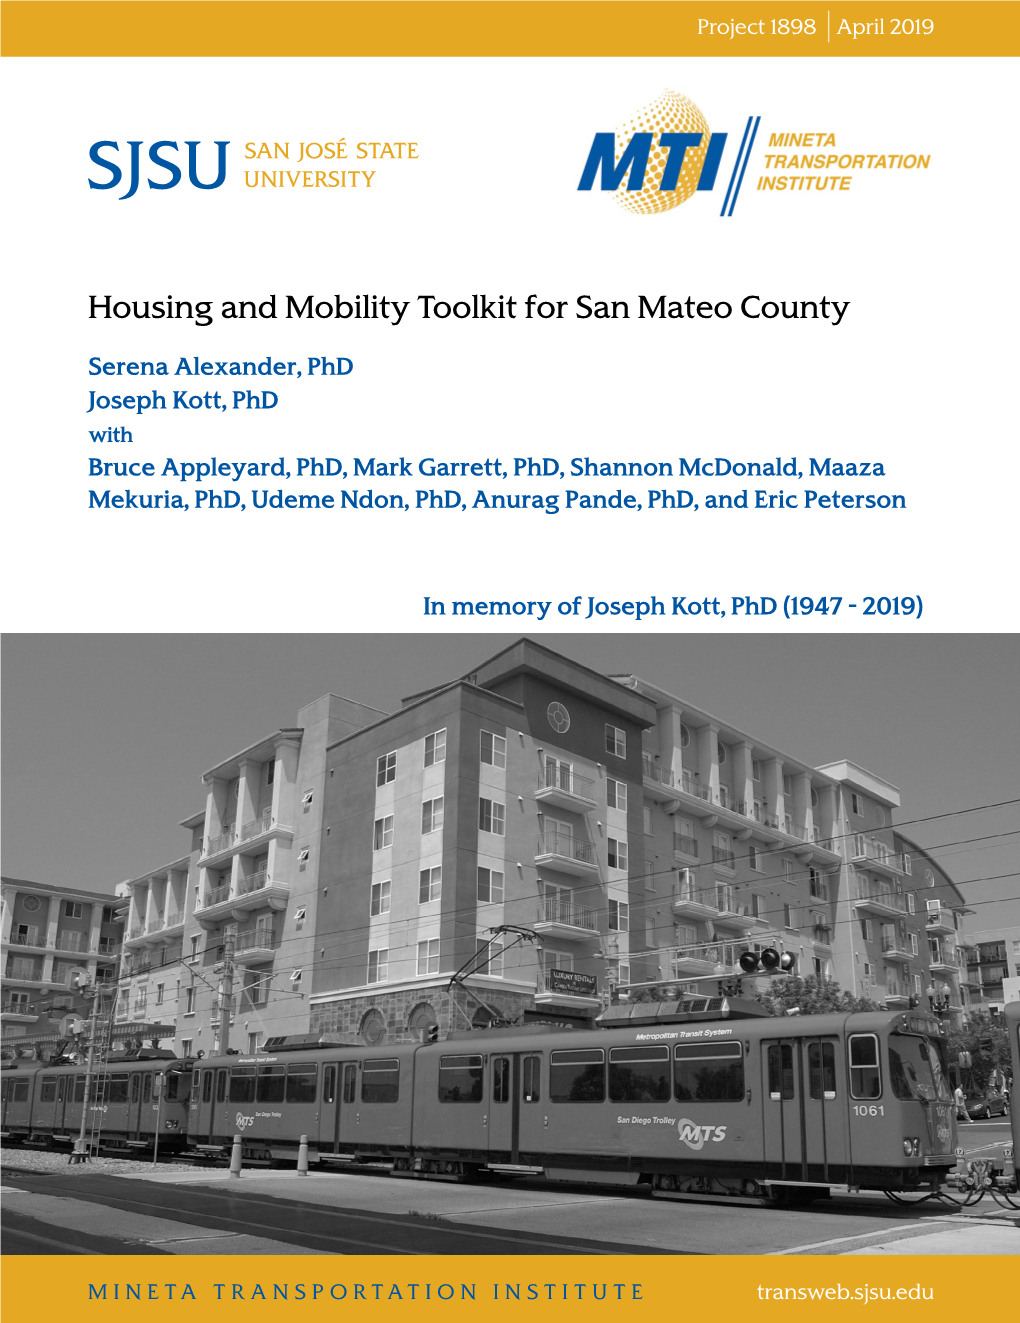 Housing and Mobility Toolkit for San Mateo County